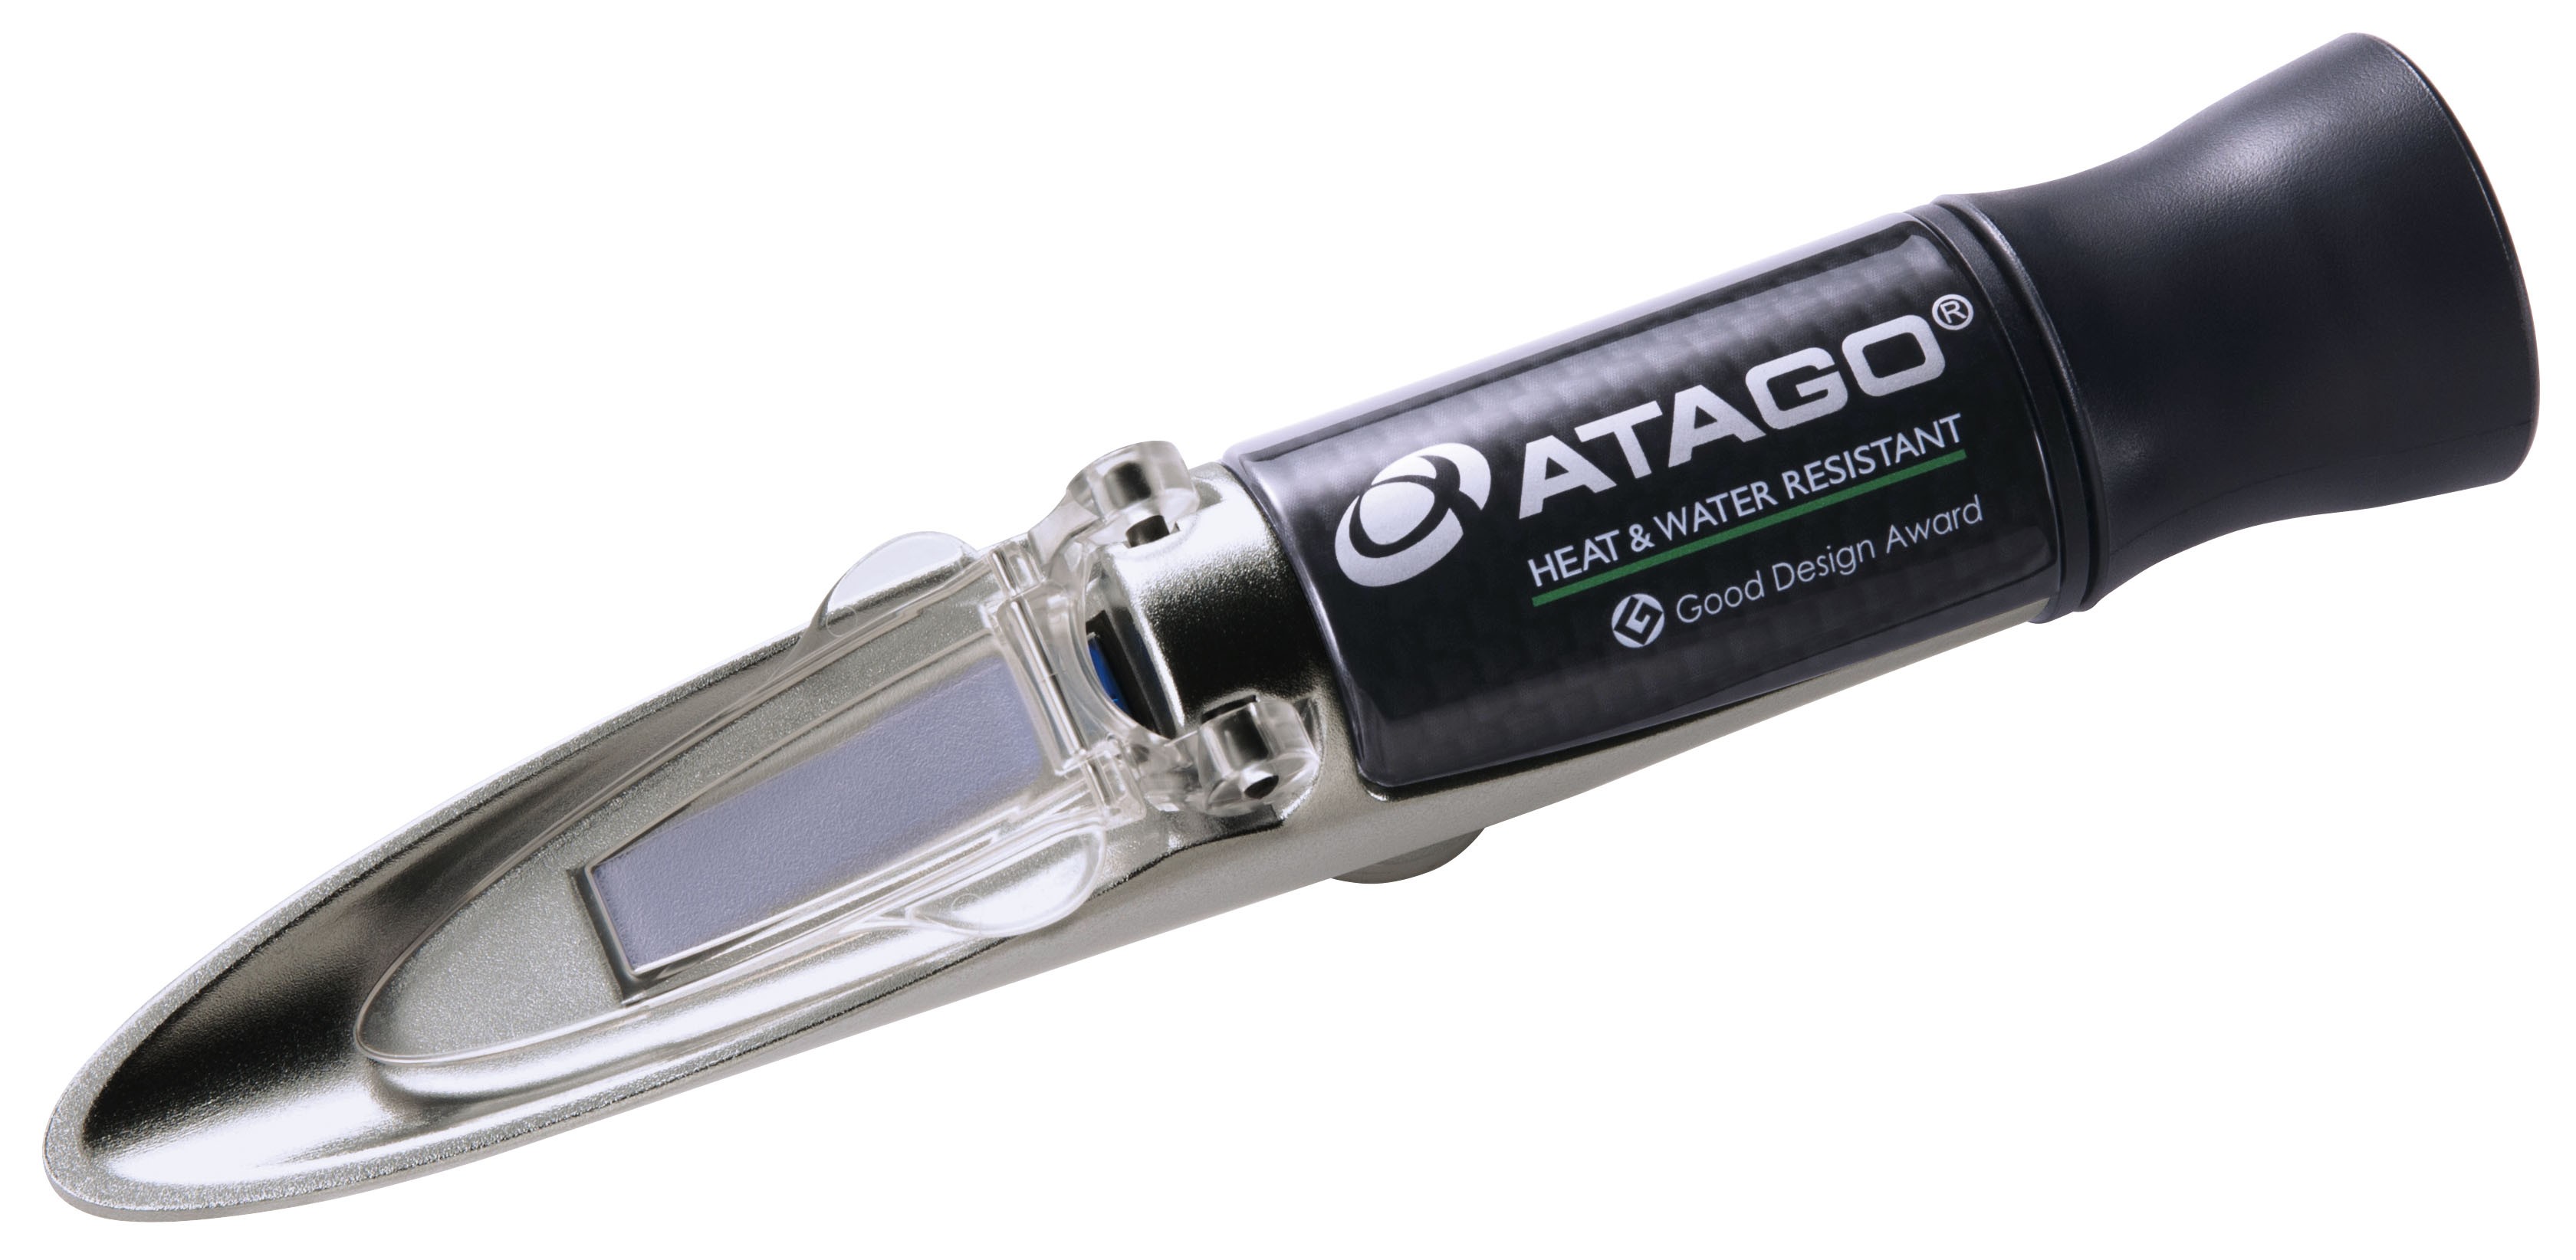 Atago Master Series, Optical Analogue Hand-Held Refractometers - Heat and Water Resistant